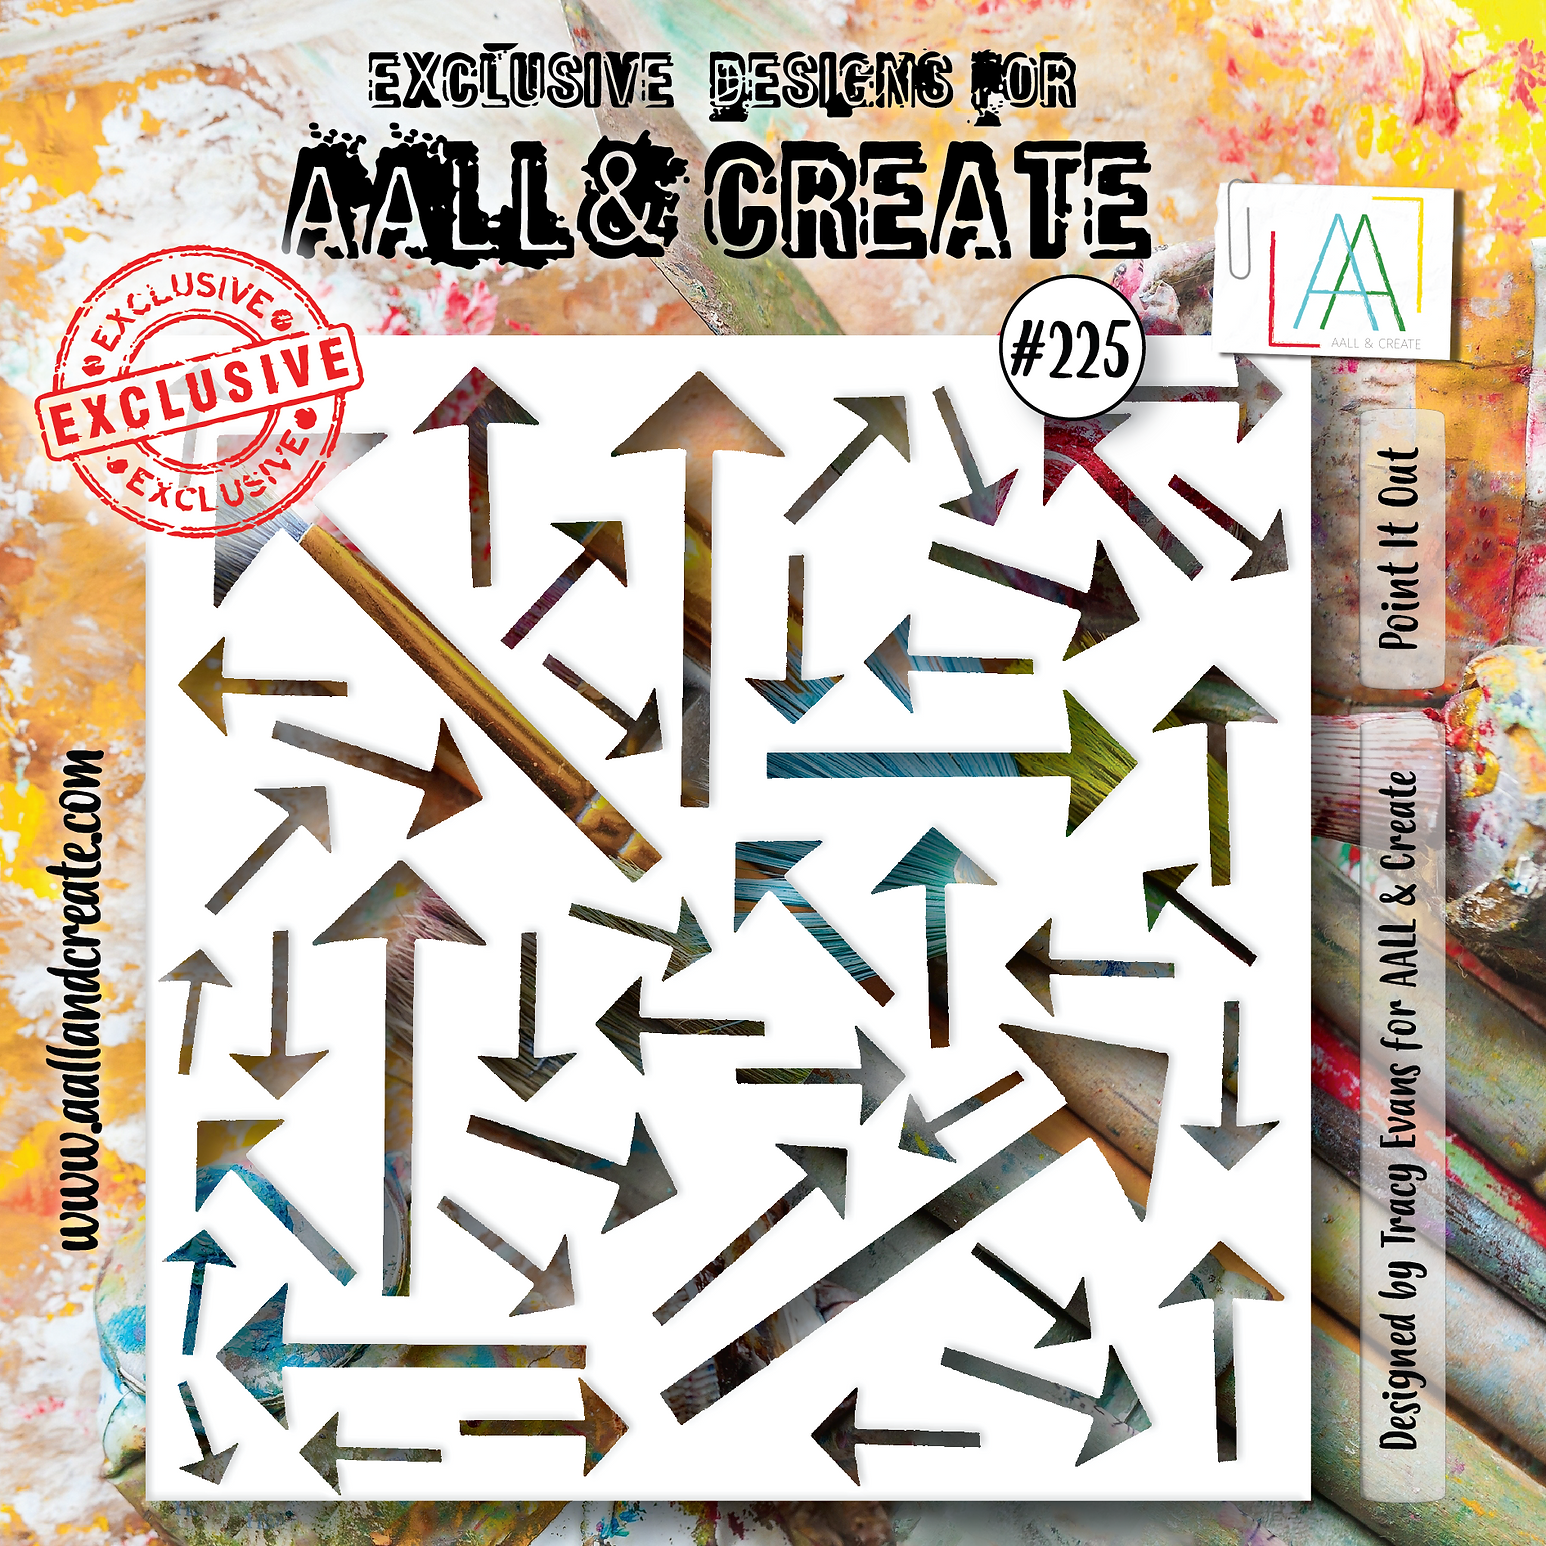 AALL & Create 6 x 6" Stencil  Point it Out